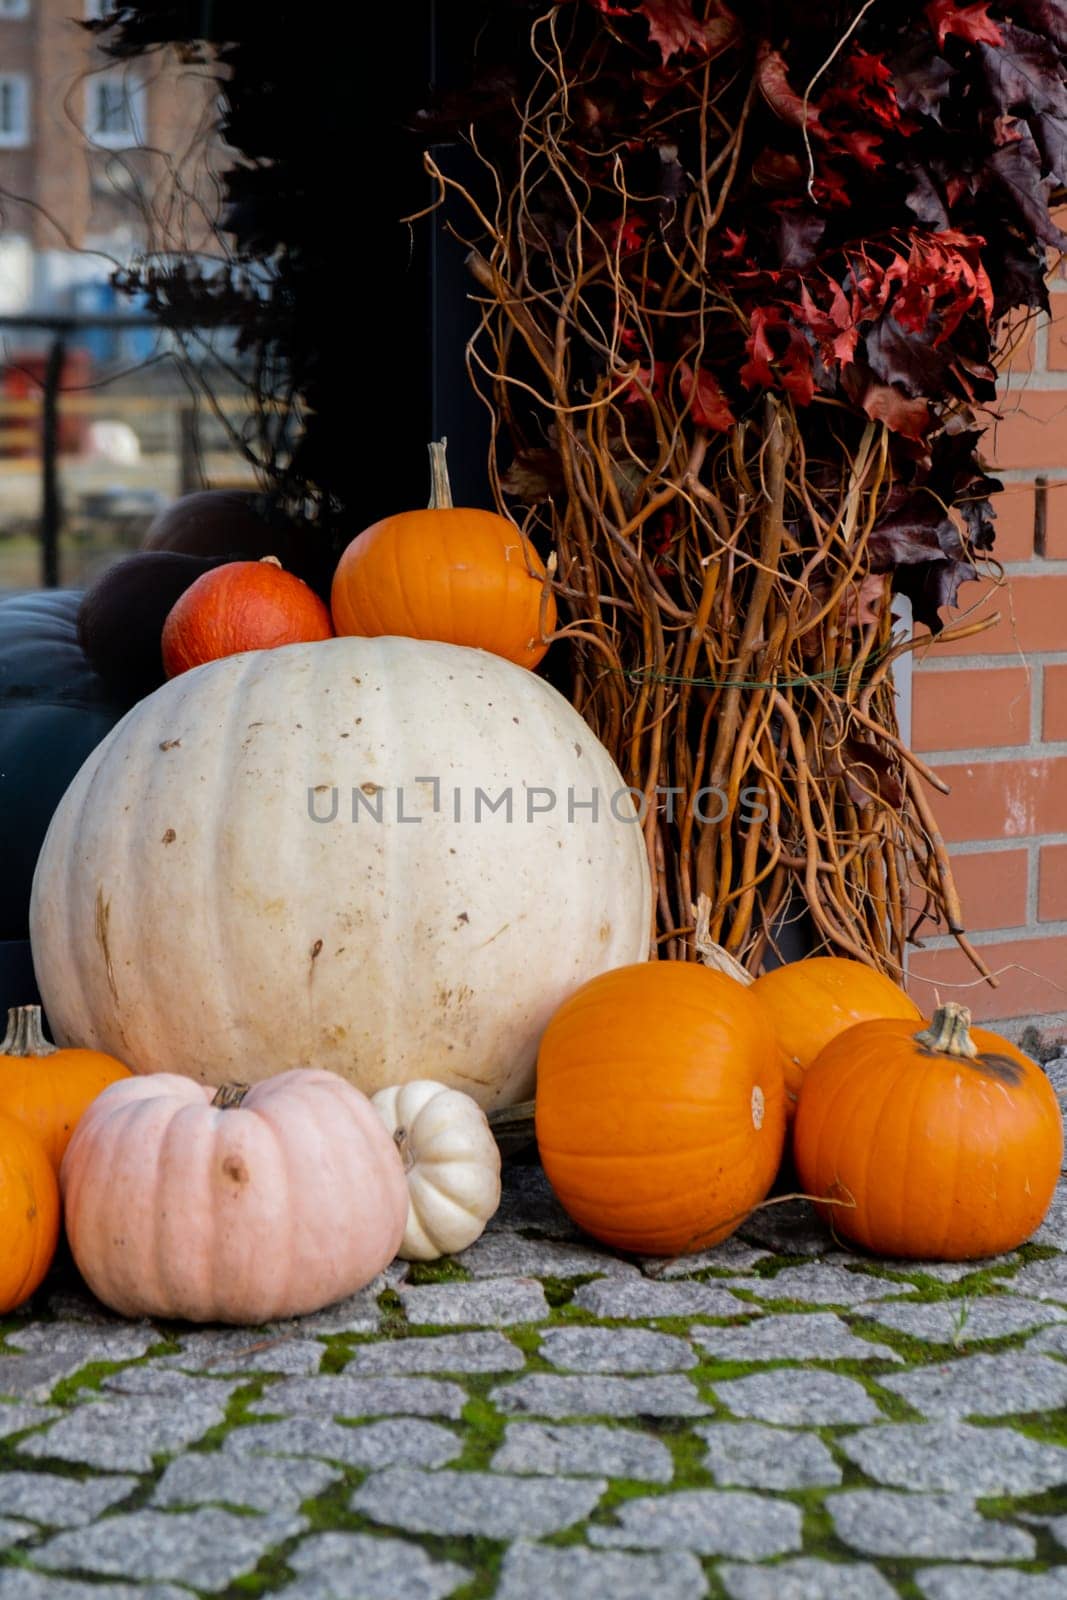 Exterior Beautiful cozy atmospheric halloween pumpkins decorated on porch. Autumn leaves and fall flowers holiday Thanksgiving October season outdoors in city by anna_stasiia